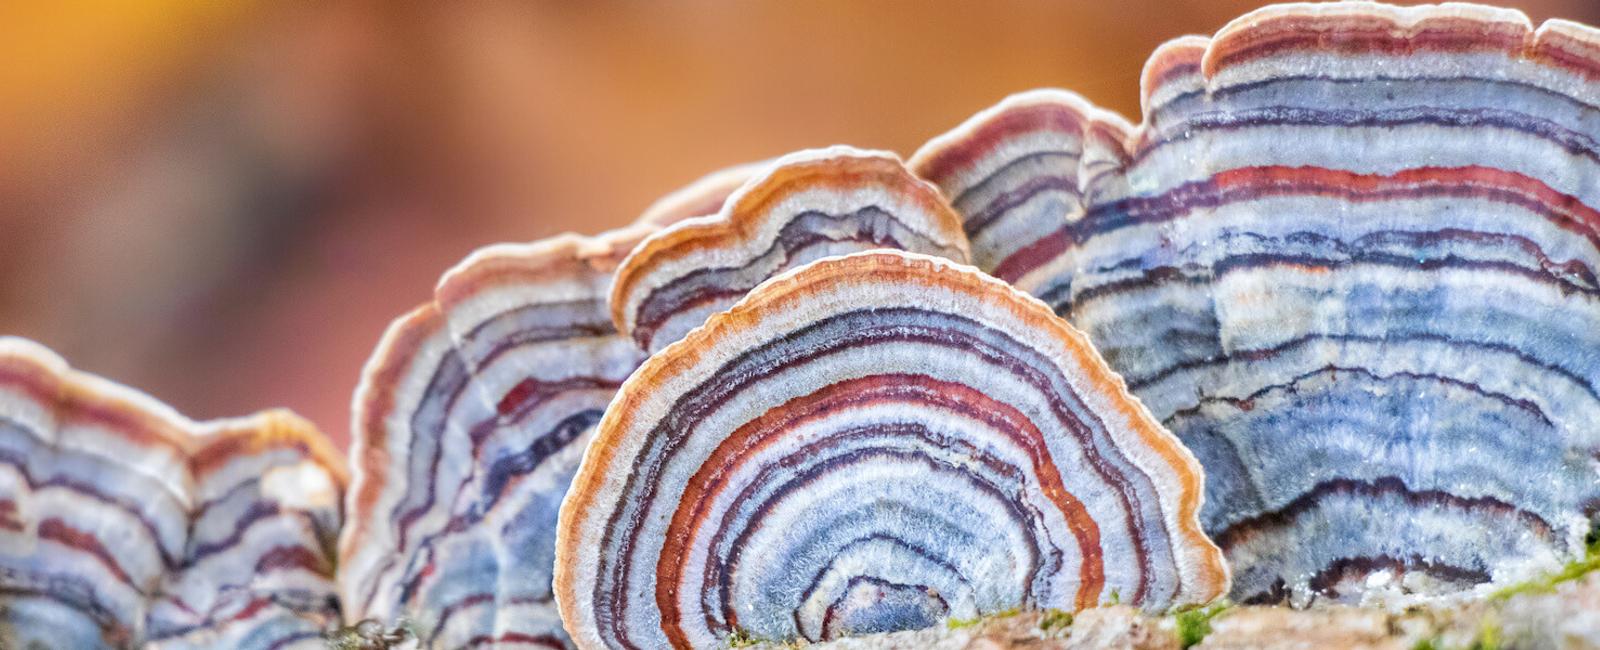 The Complete Guide to Turkey Tail Mushrooms